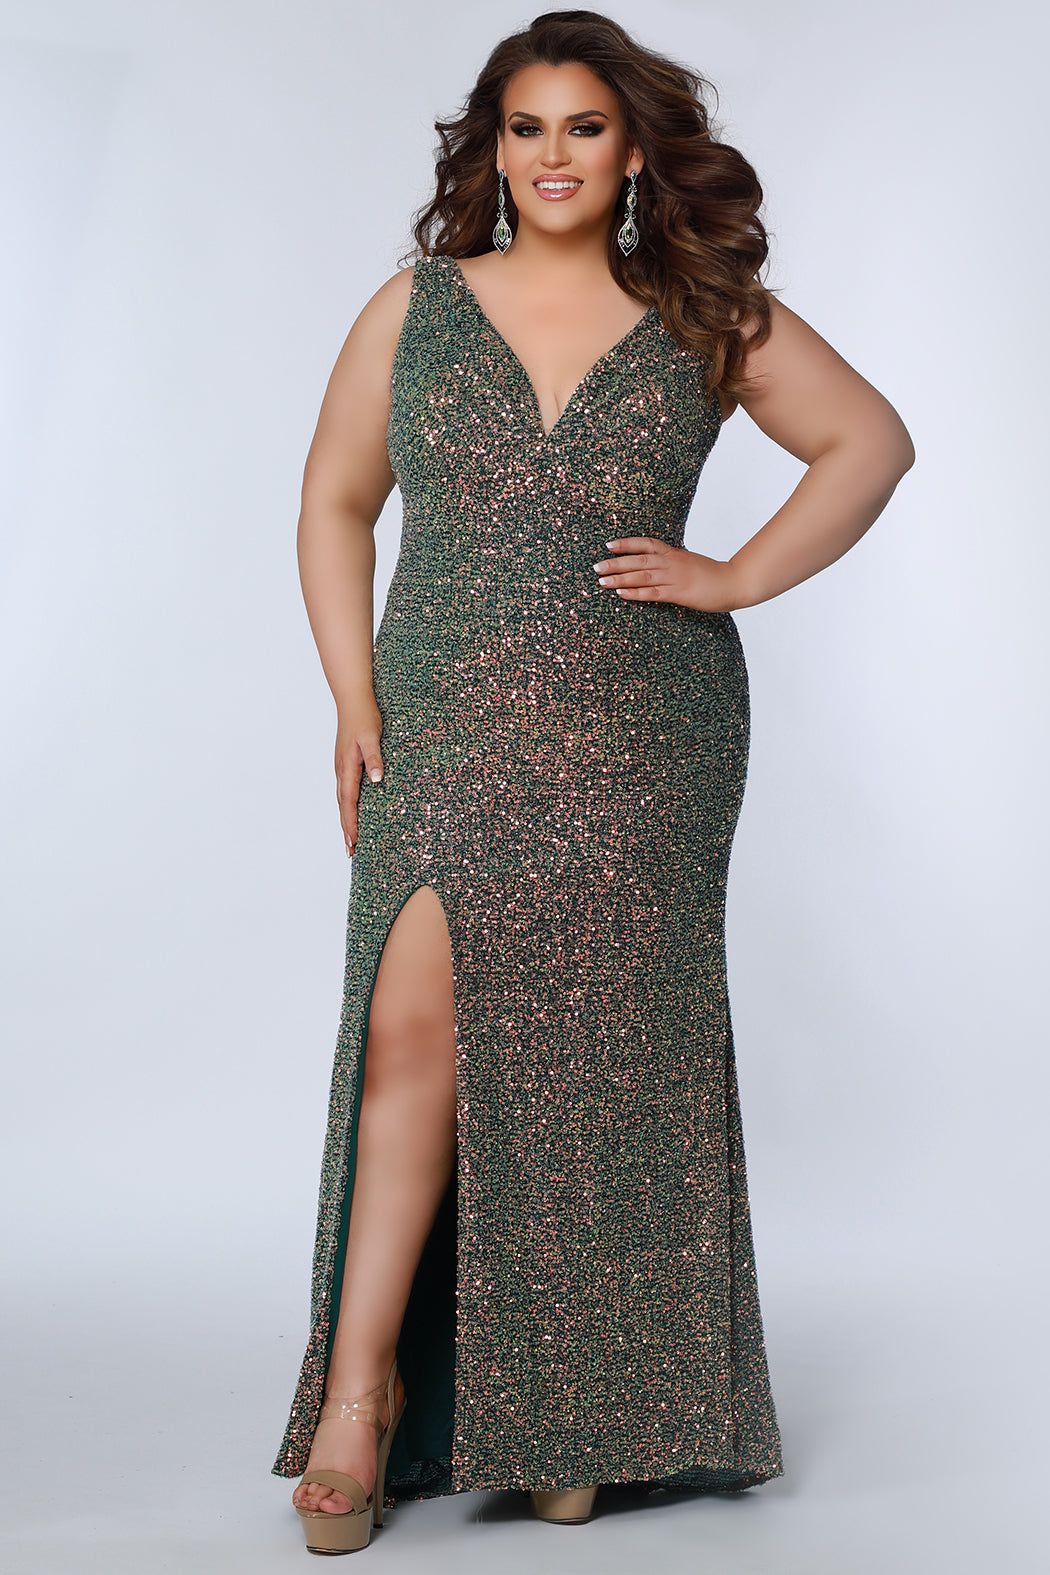 Style SC7339 Sydney's Closet Plus Size 22 Prom Sequined Green Side Slit Dress on Queenly